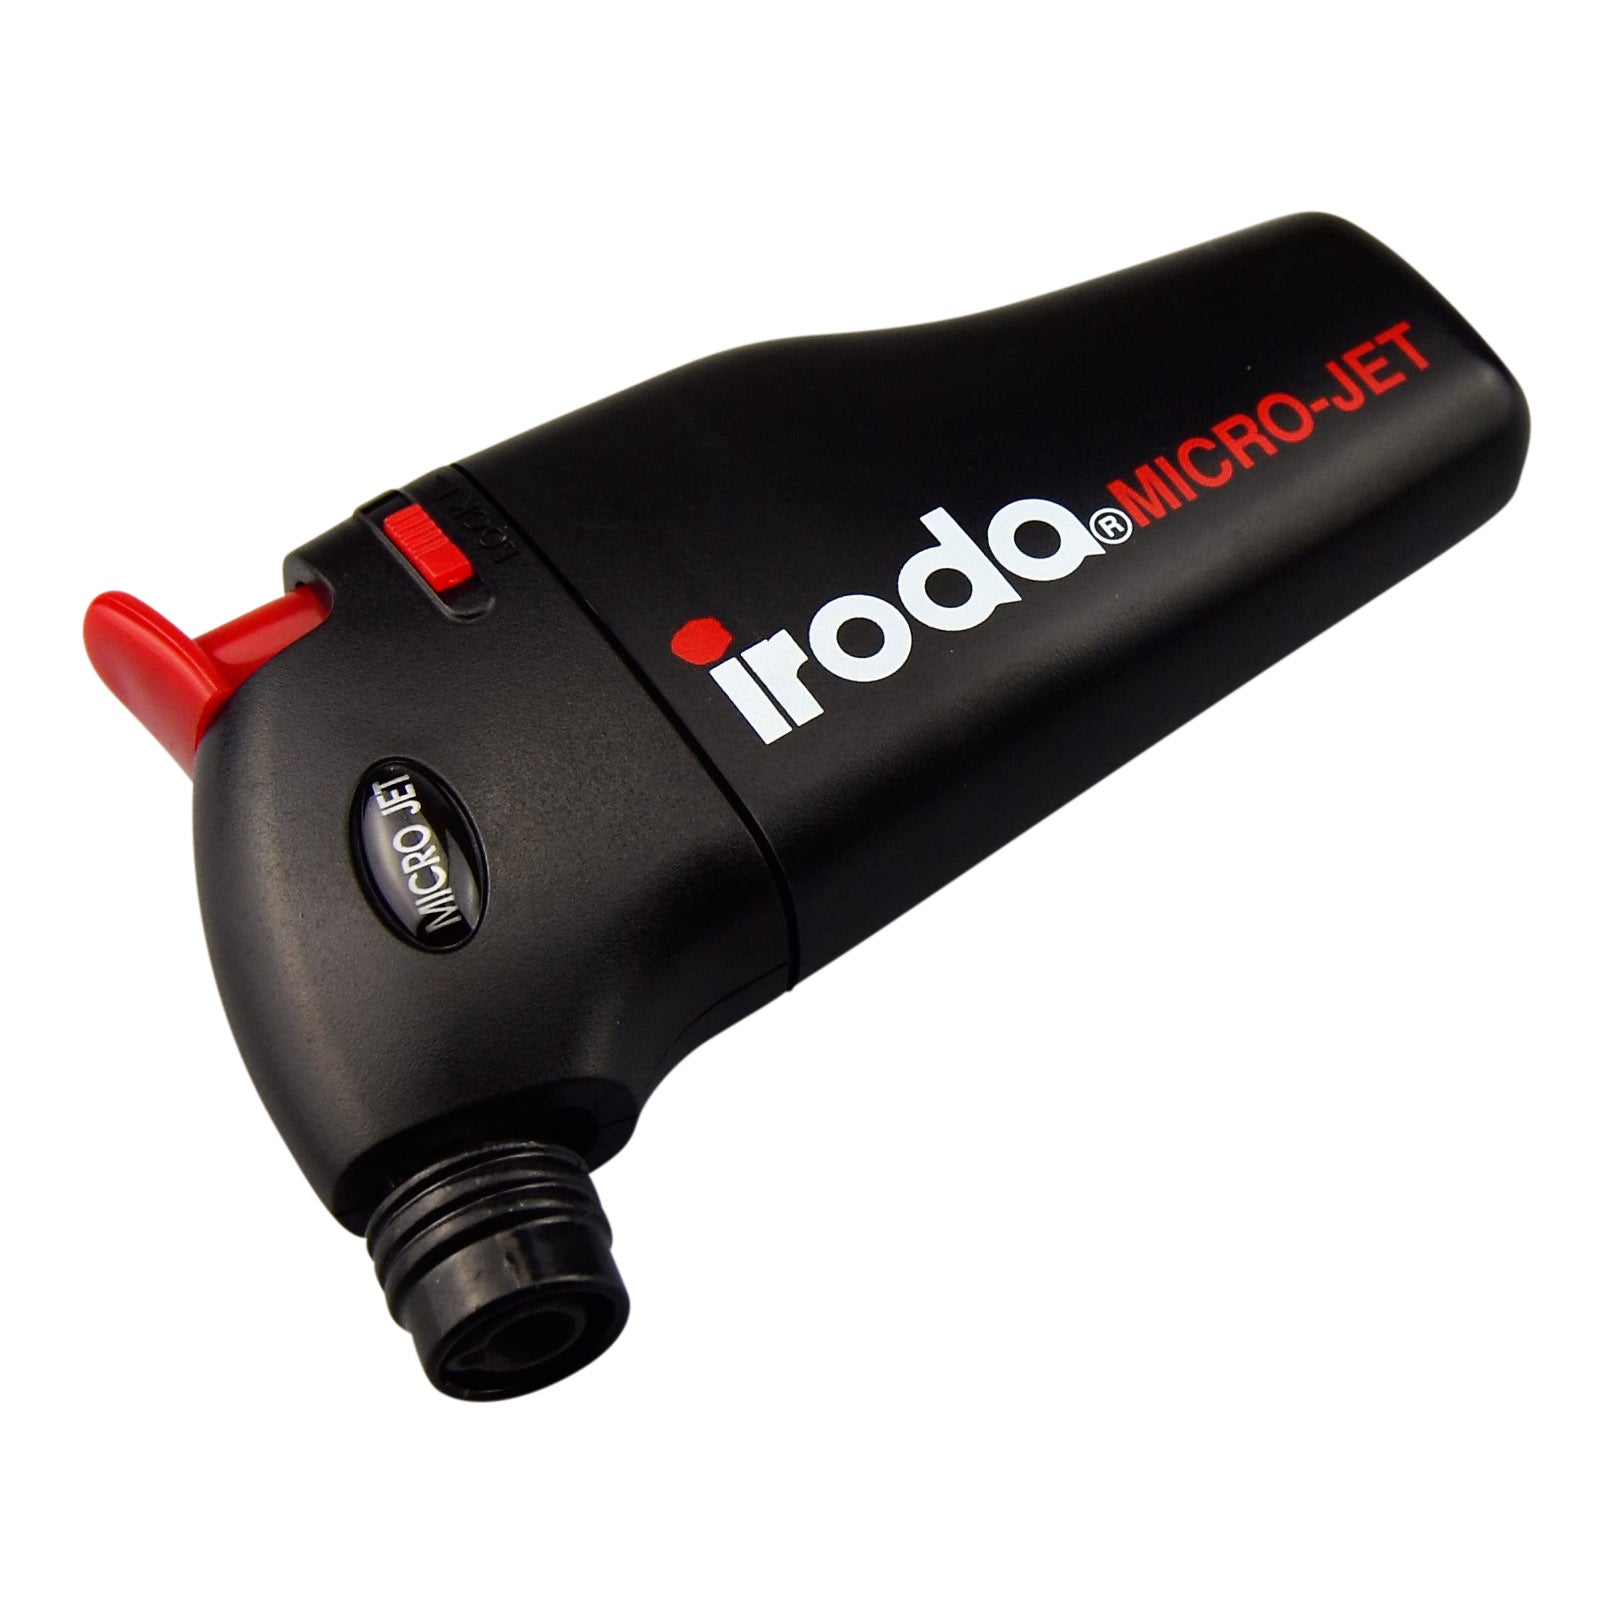 Iroda Micro-Jet Torch with Adjustable Flame